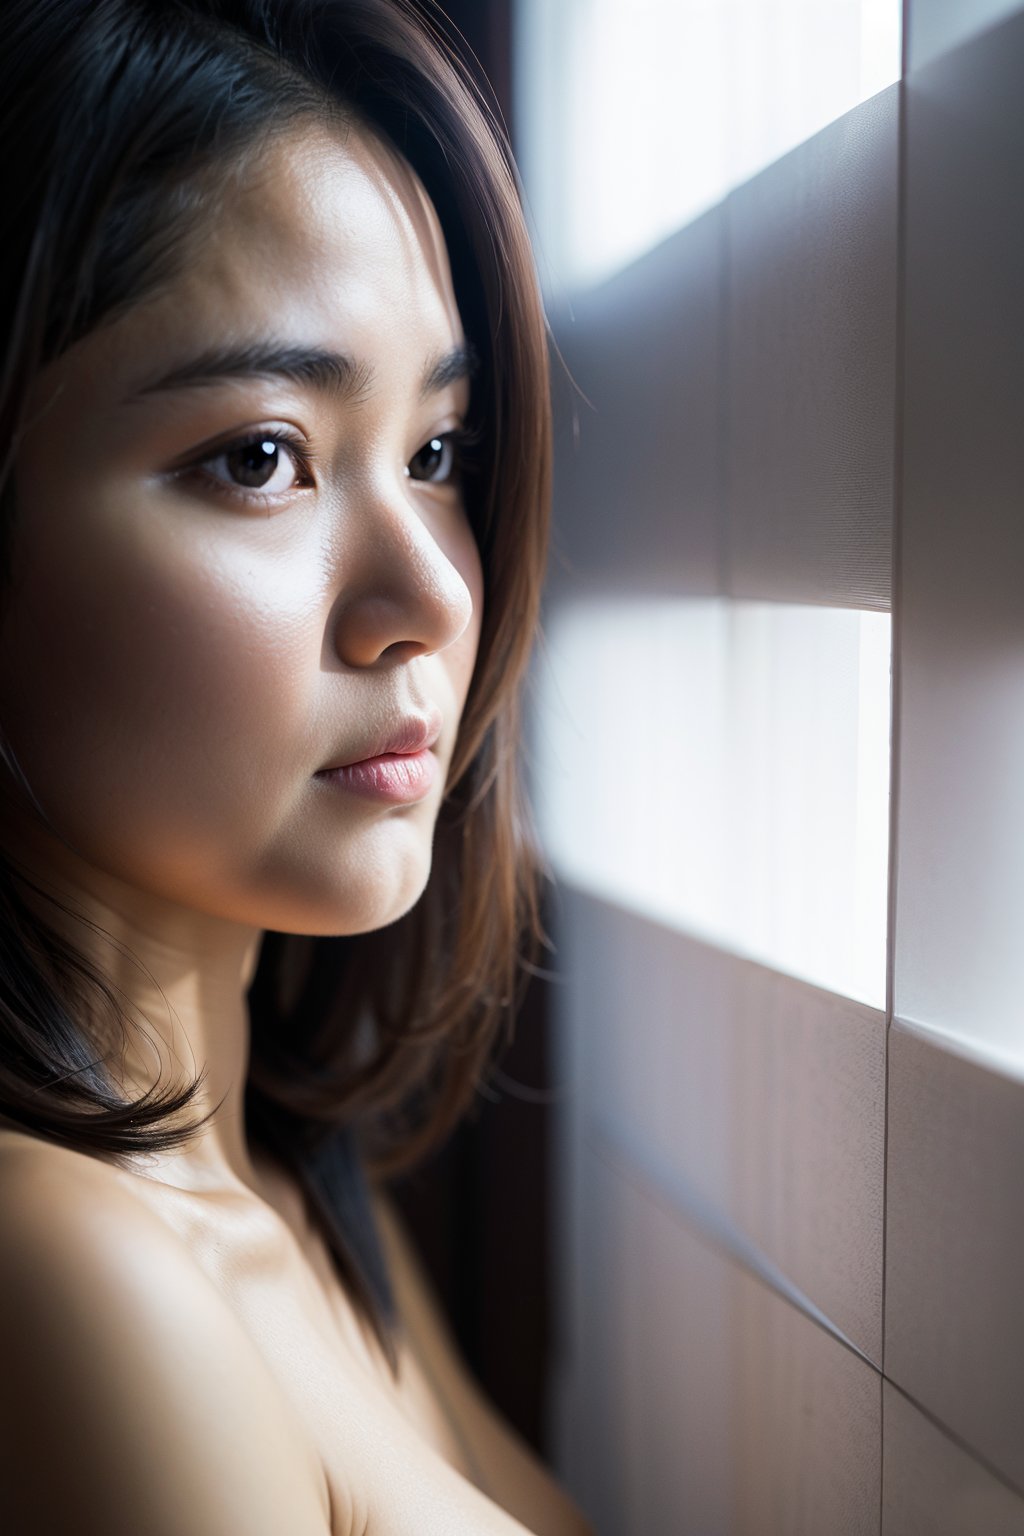 raw photo,  indonesian woman,  (close-up),  naked,  natural lighting,  blinds shadow,  grey background